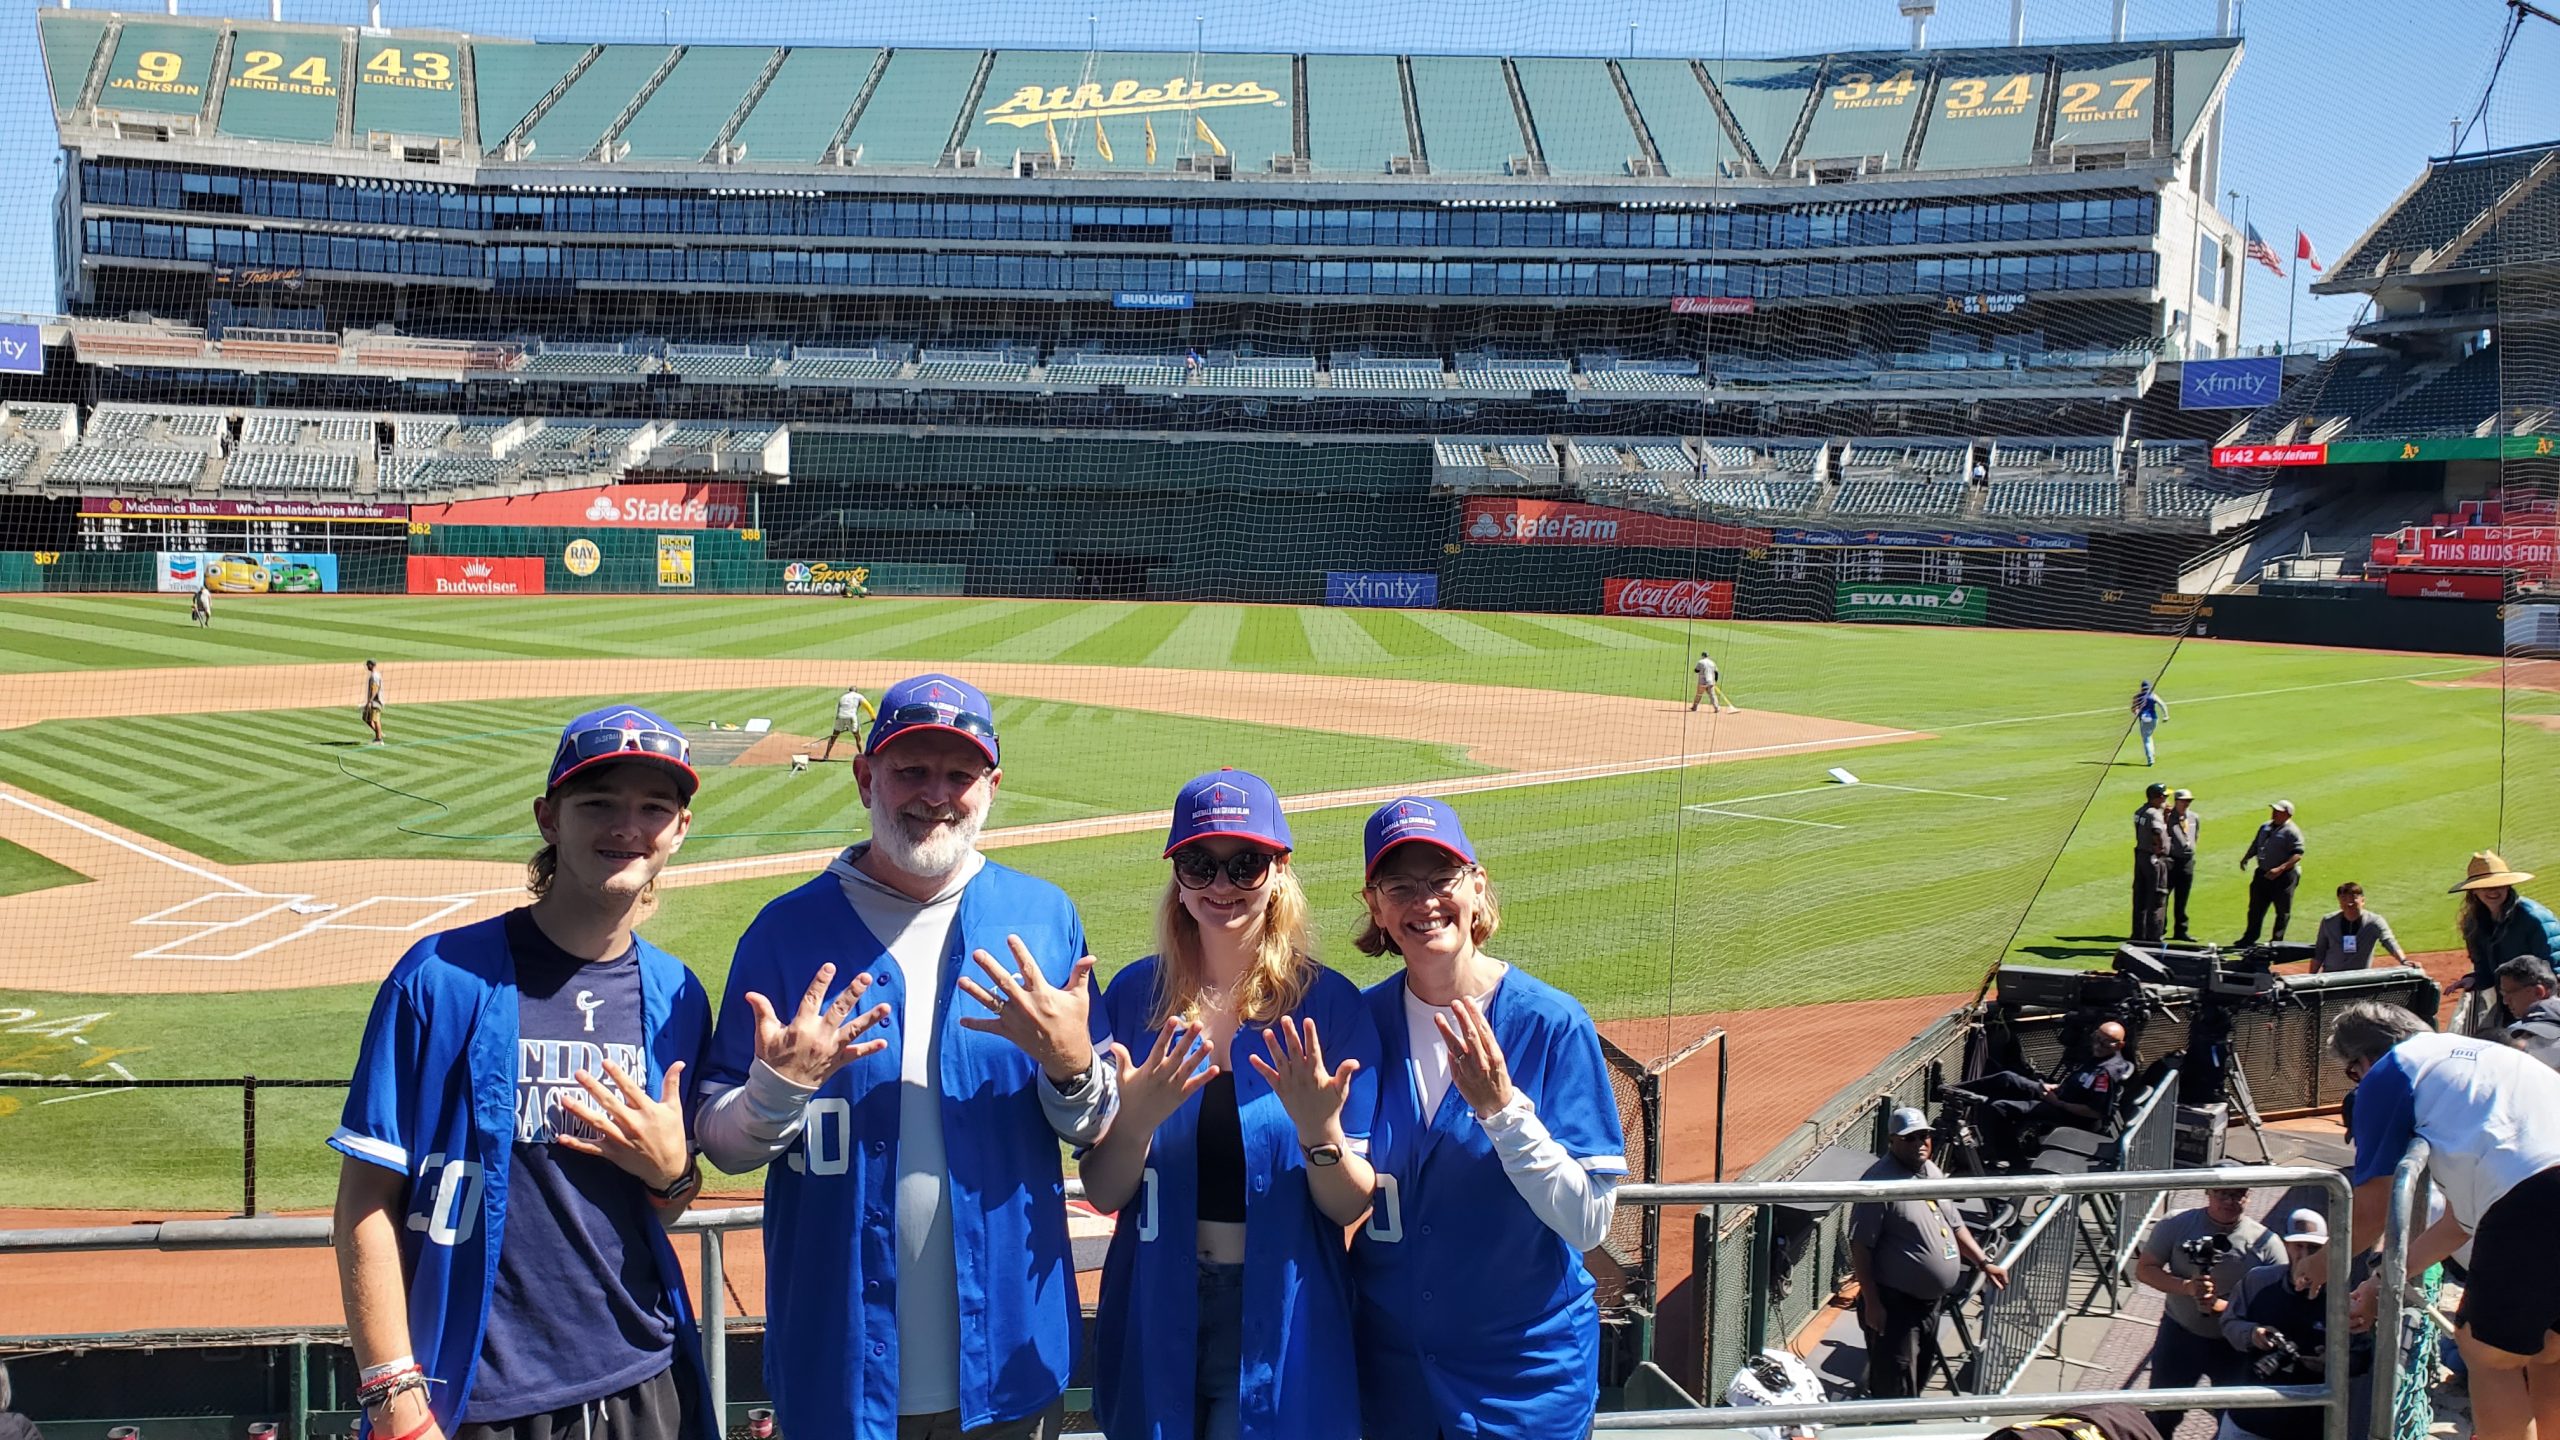 Brad, Heather, Ryan, and Emma at the Oakland Coliseum.